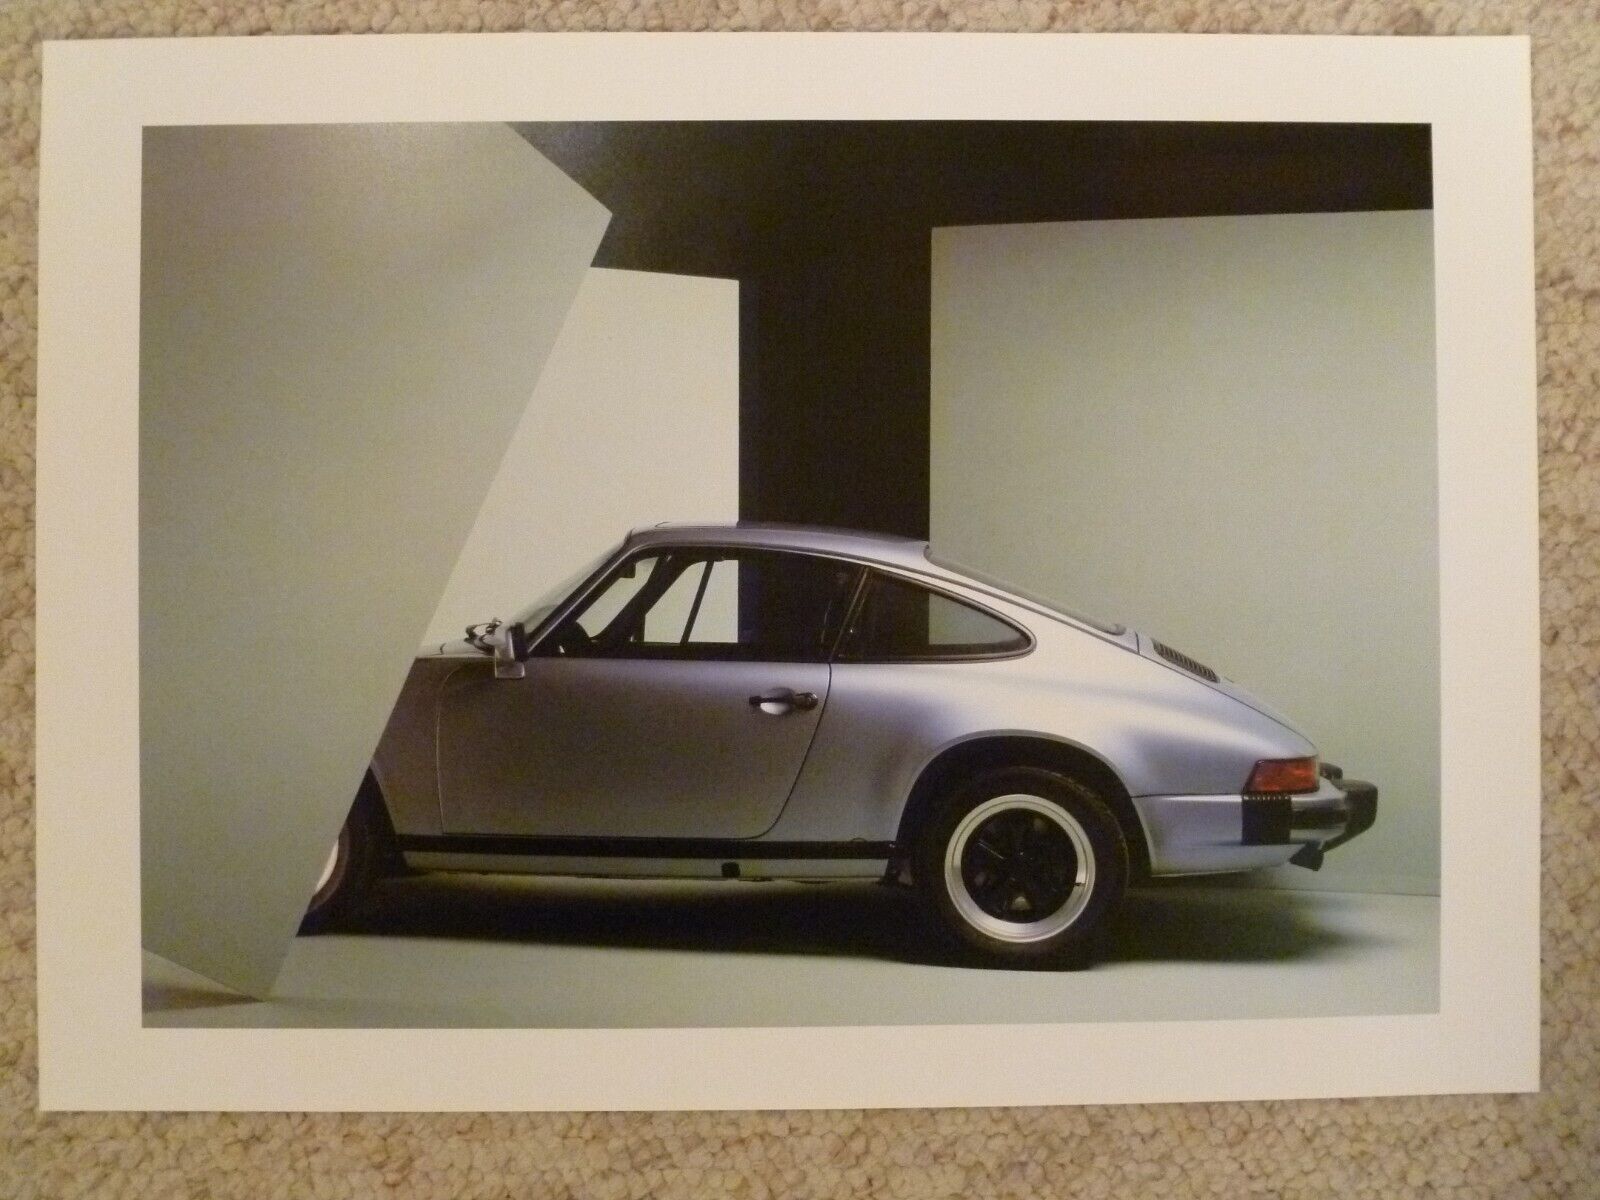 1983 Porsche 911 Coupe Showroom Advertising Sales Poster - RARE Awesome 21 x 17